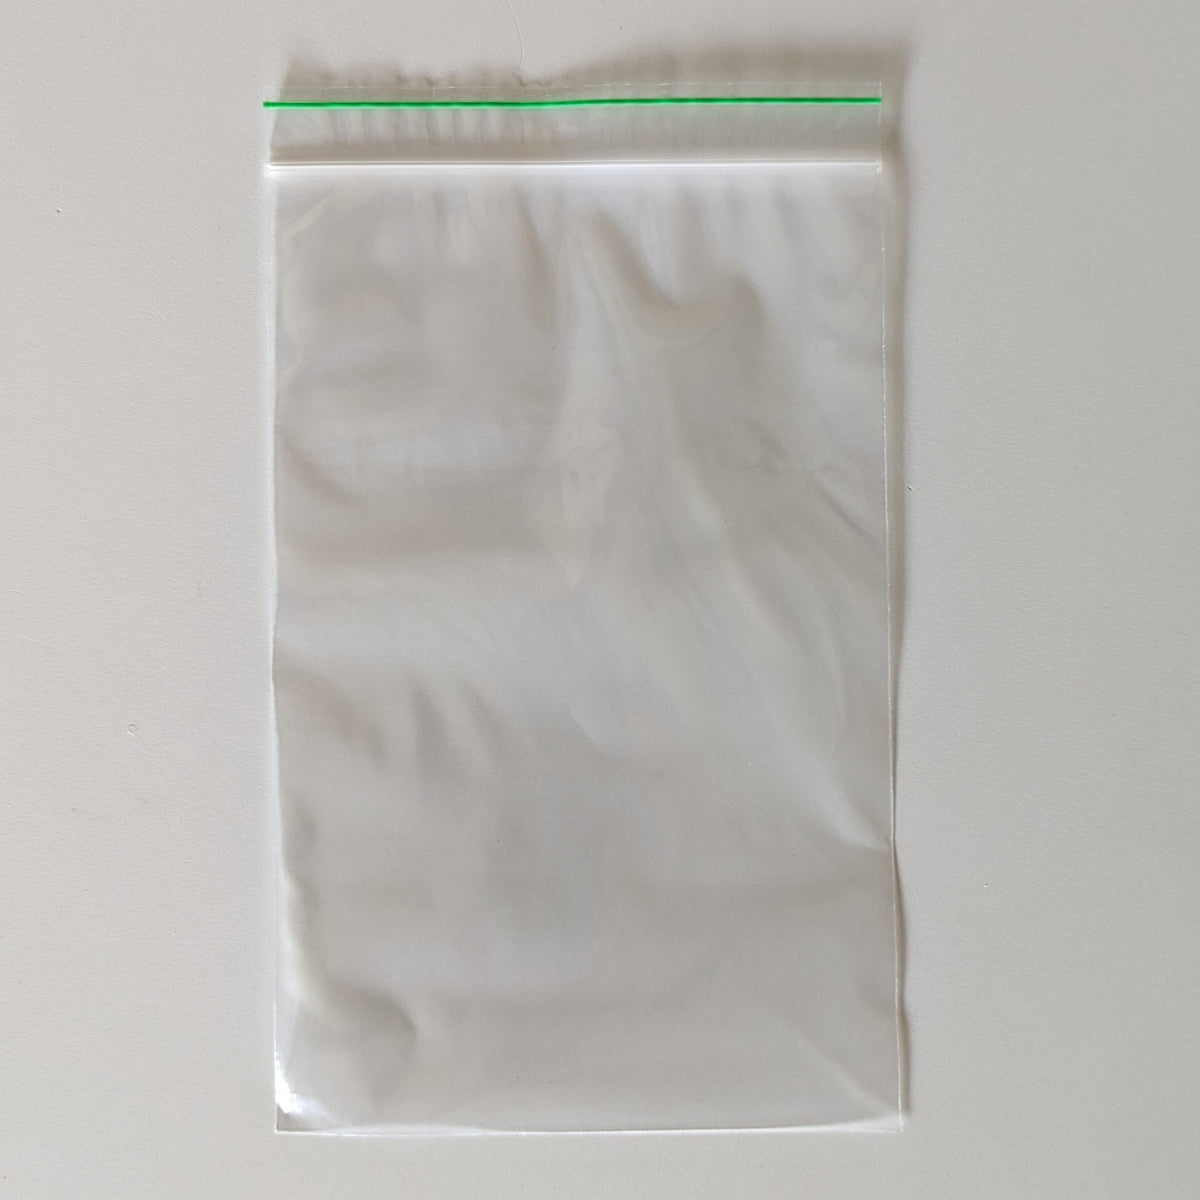 2 in Length 2 in Width Reclosable & Zipper Bags for sale